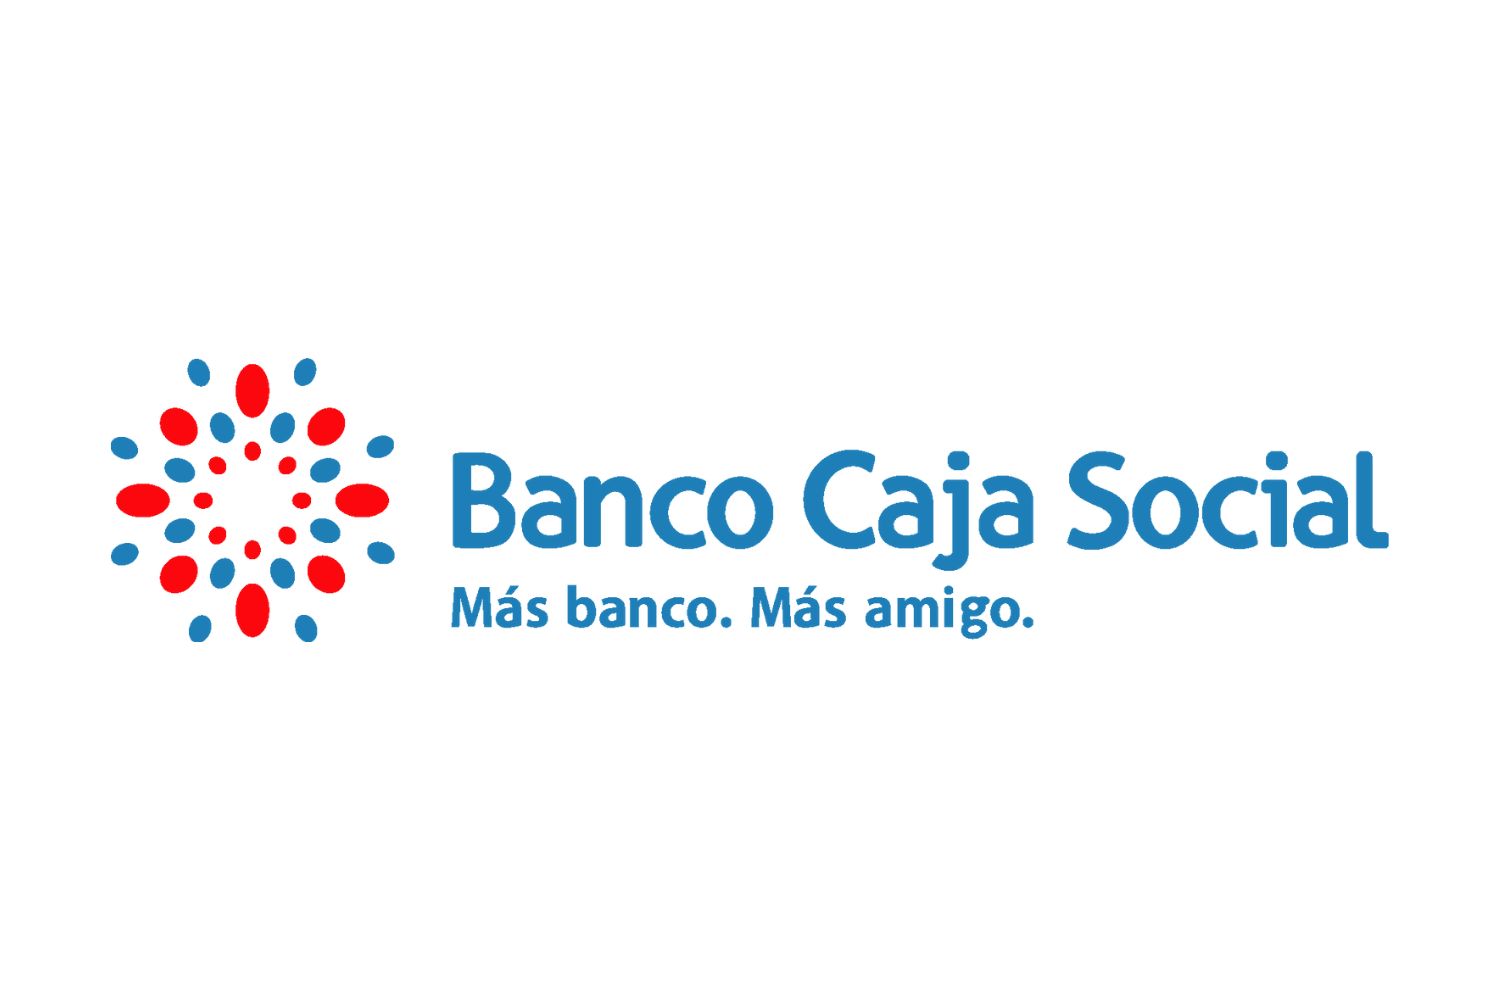 12-mind-blowing-facts-about-banco-caja-social